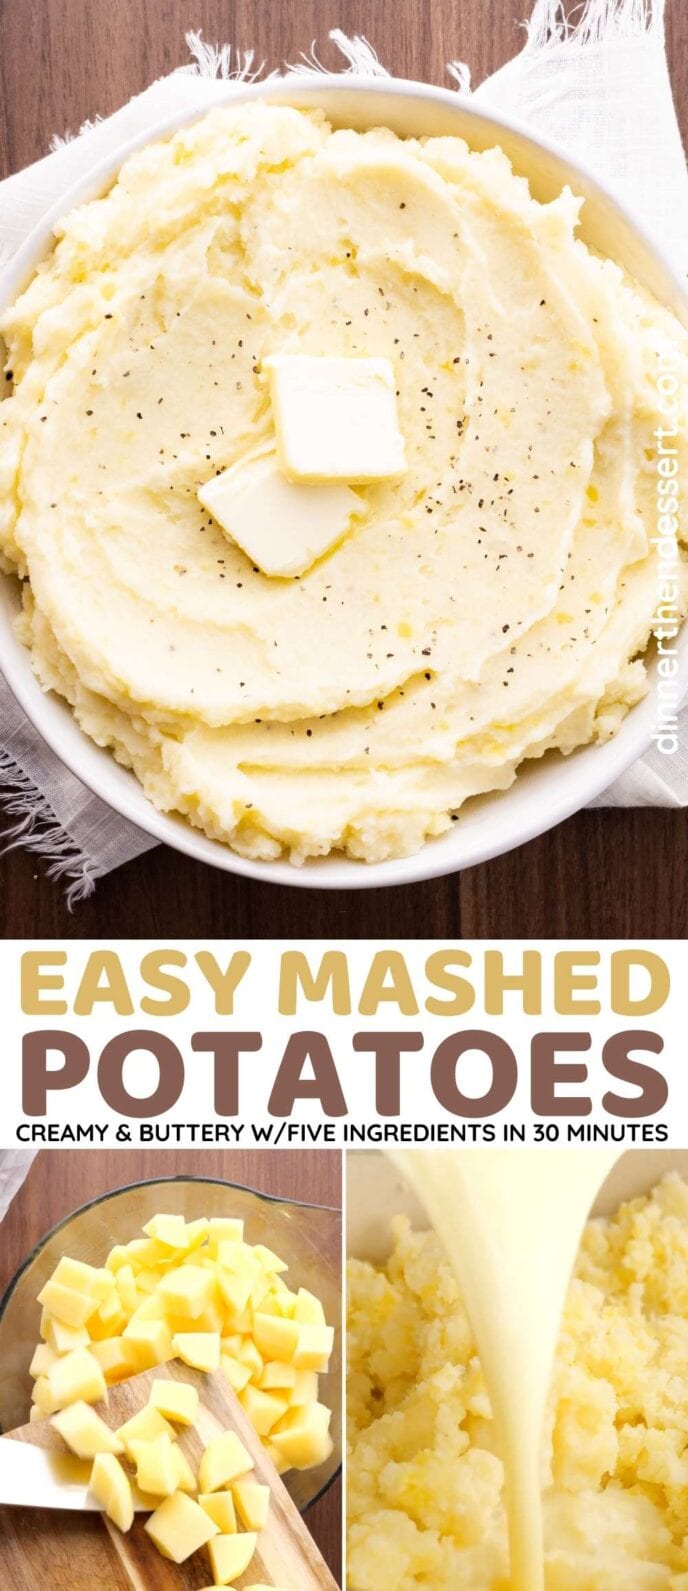 Easy Mashed Potatoes Collage